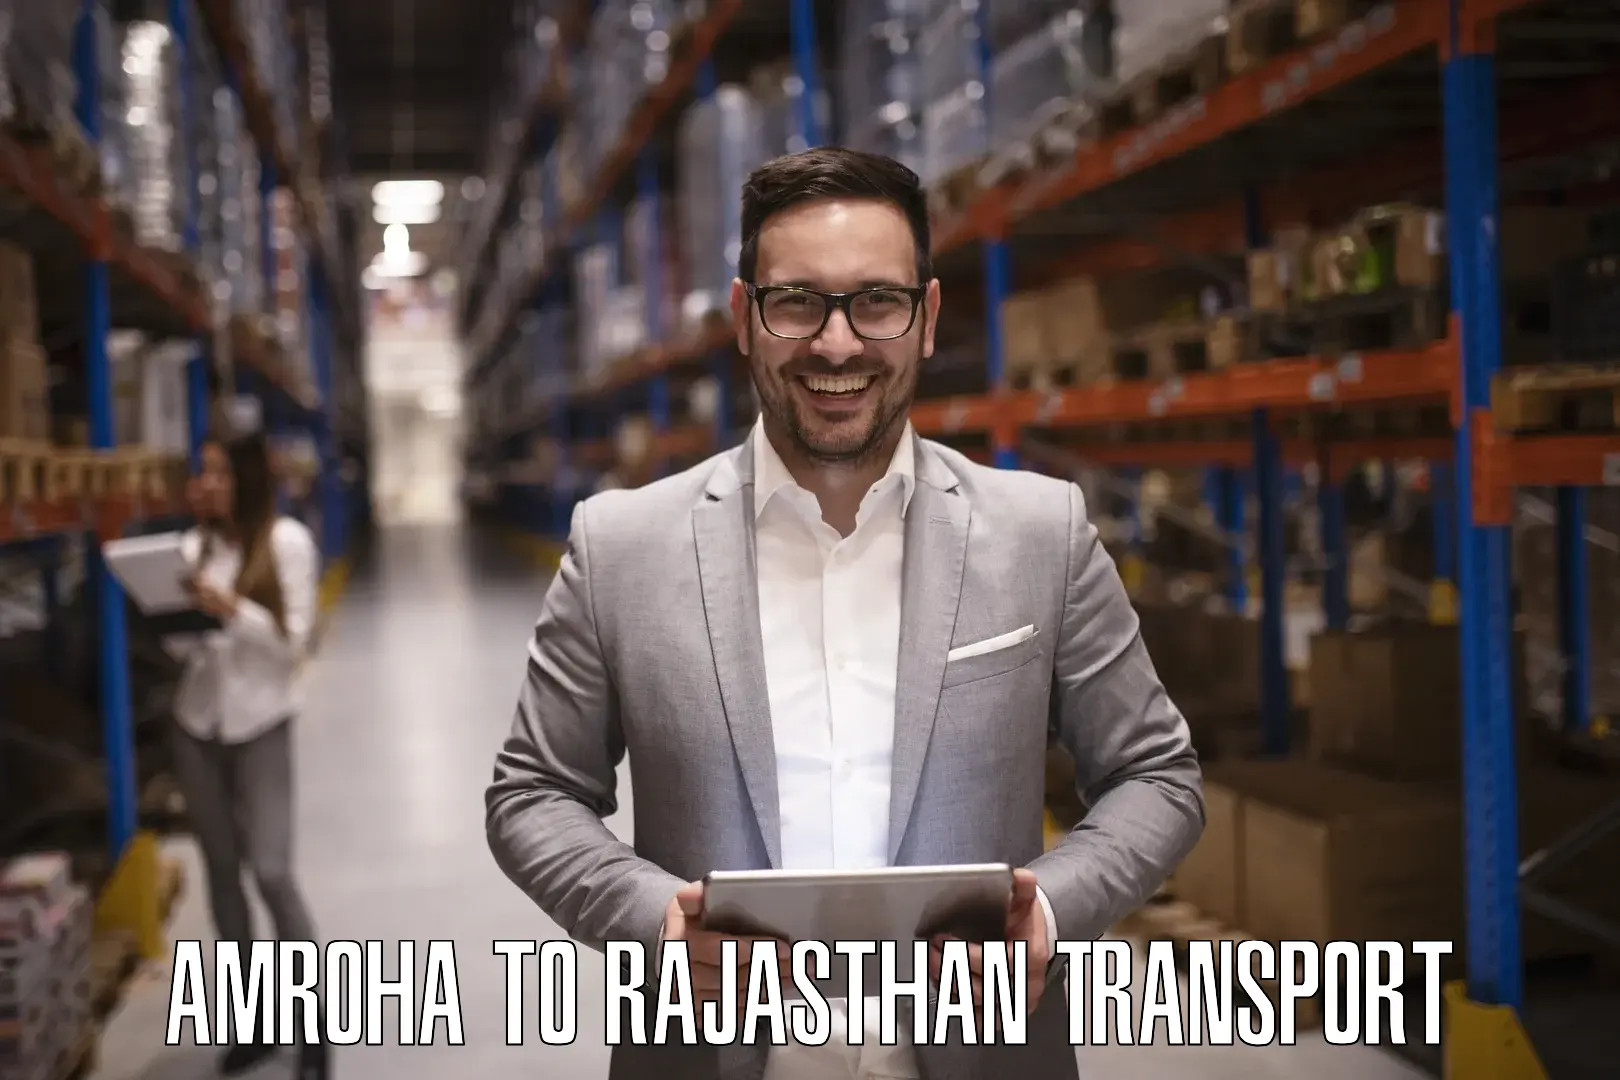 Road transport online services in Amroha to Piparcity